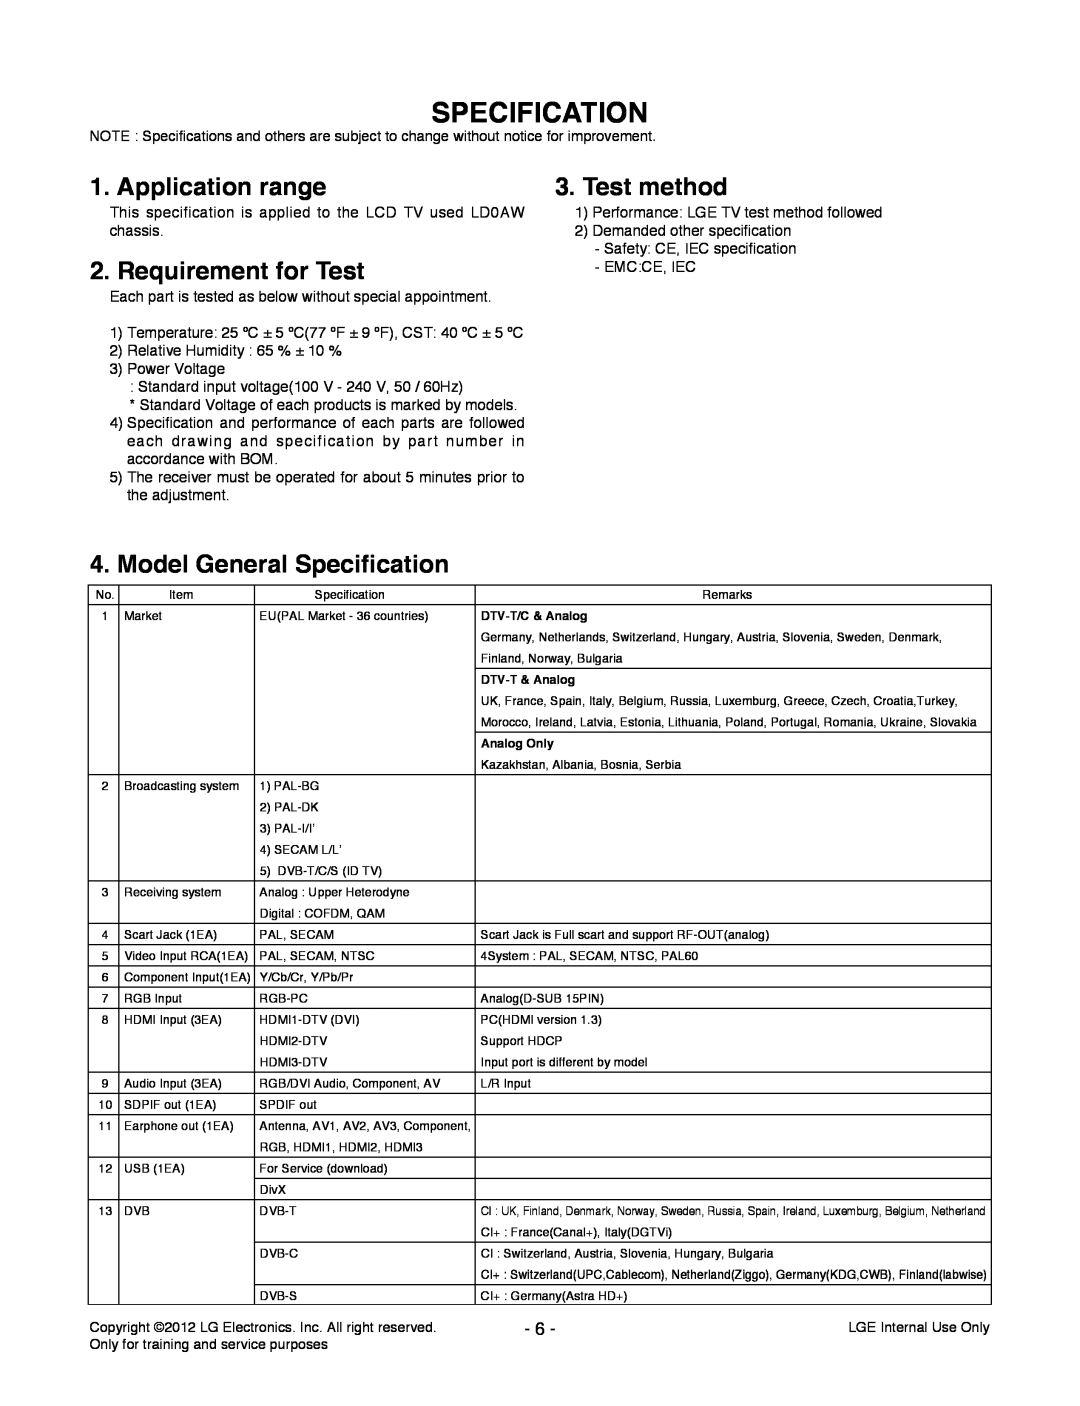 LG Electronics 42CS669C-ZD service manual Specification, Application range, Test method, Requirement for Test 